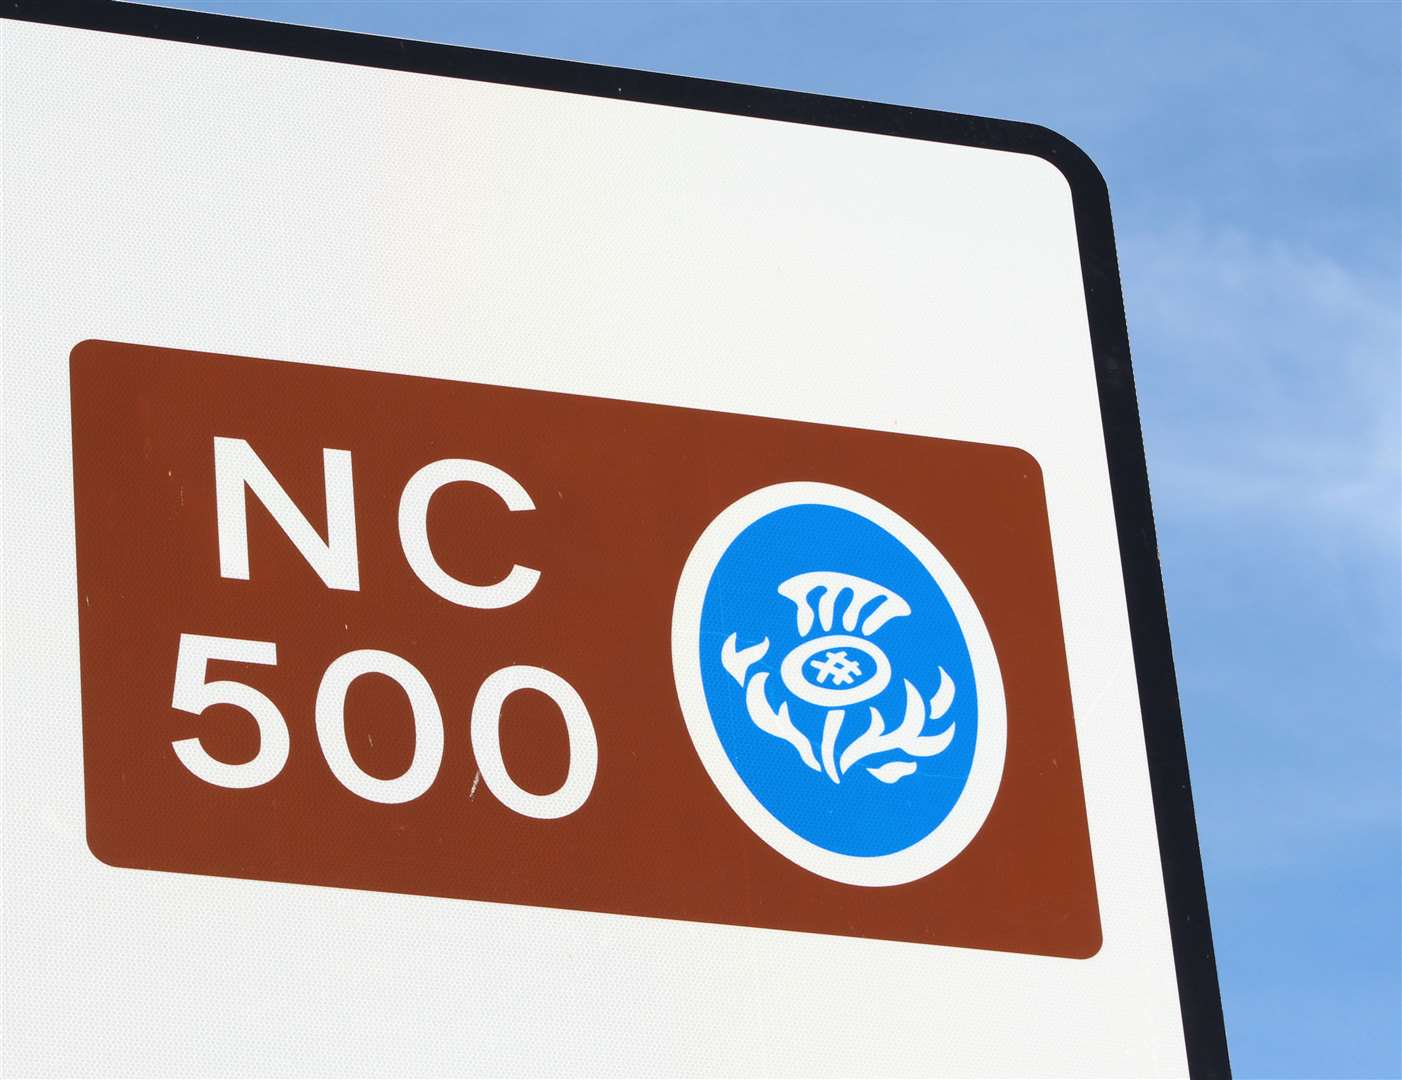 The North Coast 500 tourism route is 516 miles long.